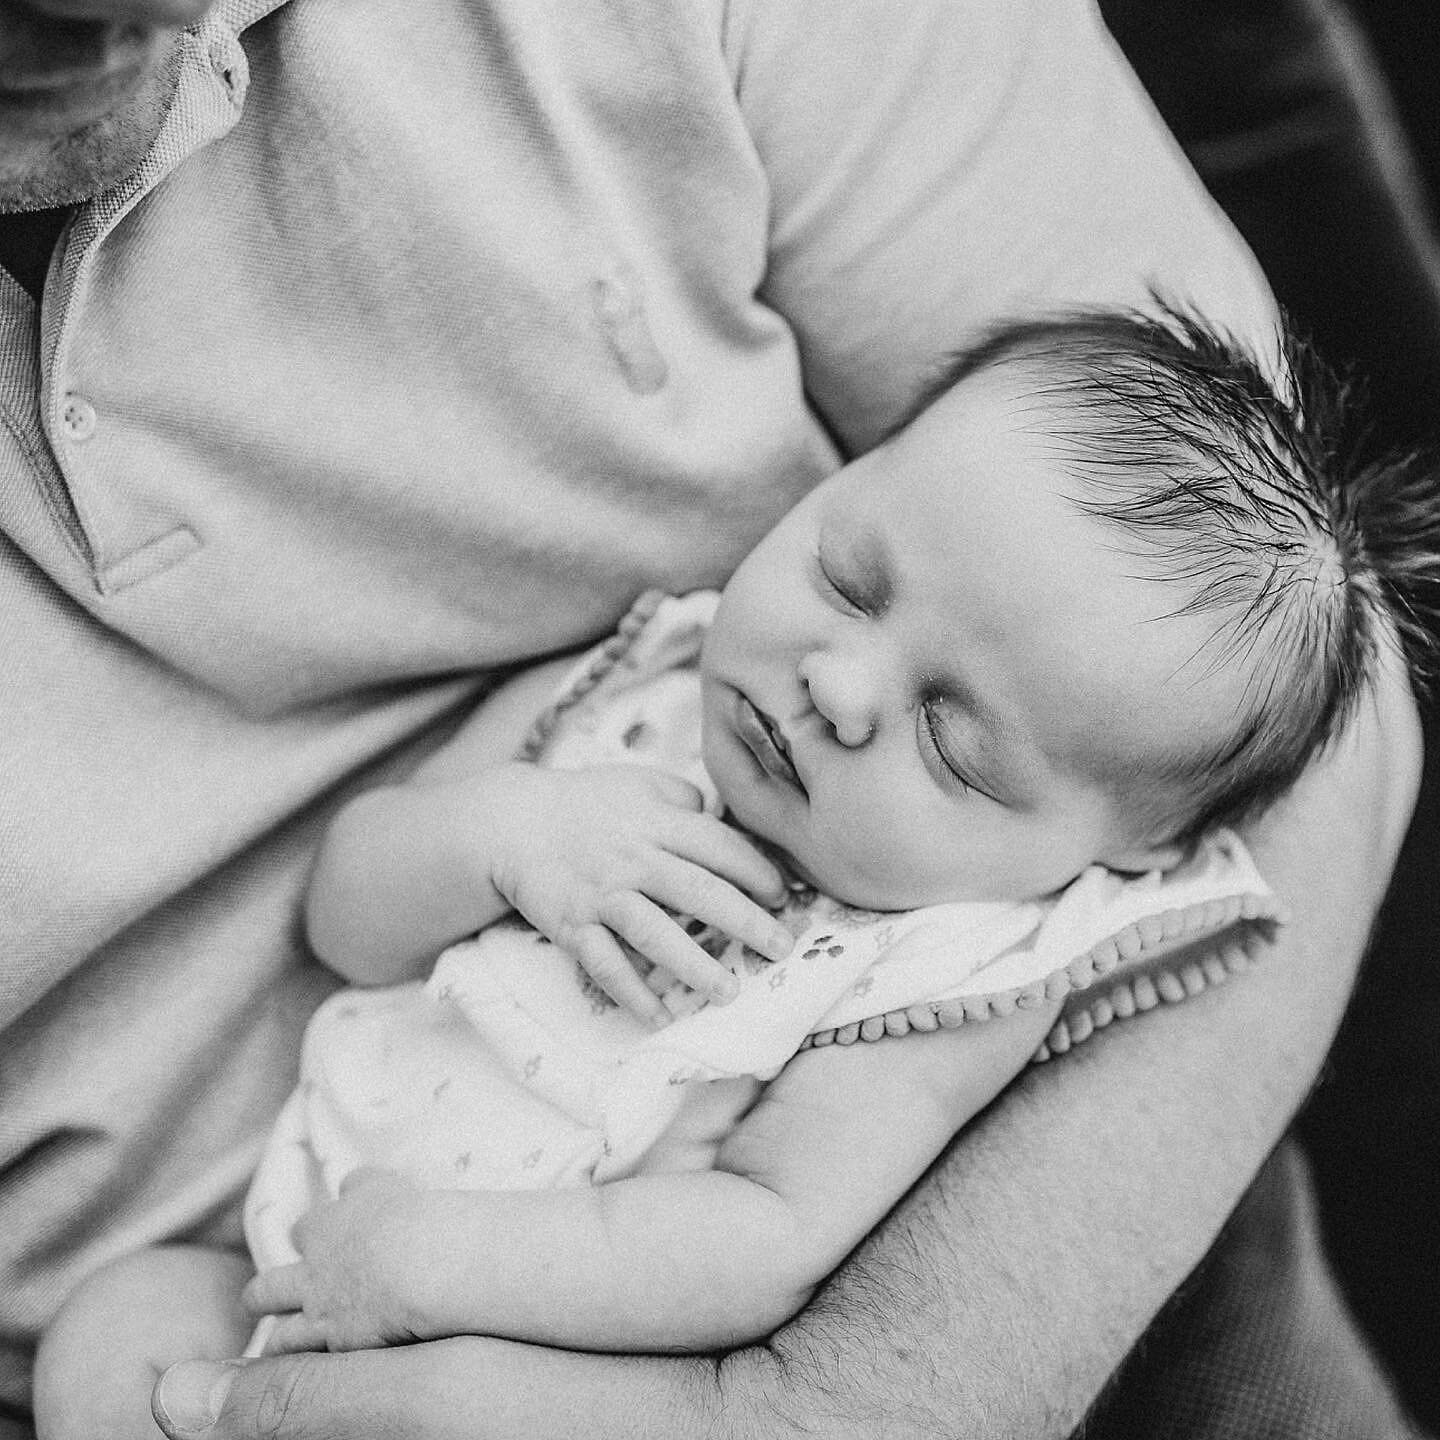 Some newborn cuteness for you this Friday morning!
It was so lovely to meet baby Connie and to see her big brother again who I also photographed as a newborn 🥰 And look at all that gorgeous hair!
I have one more space for a newborn session between n